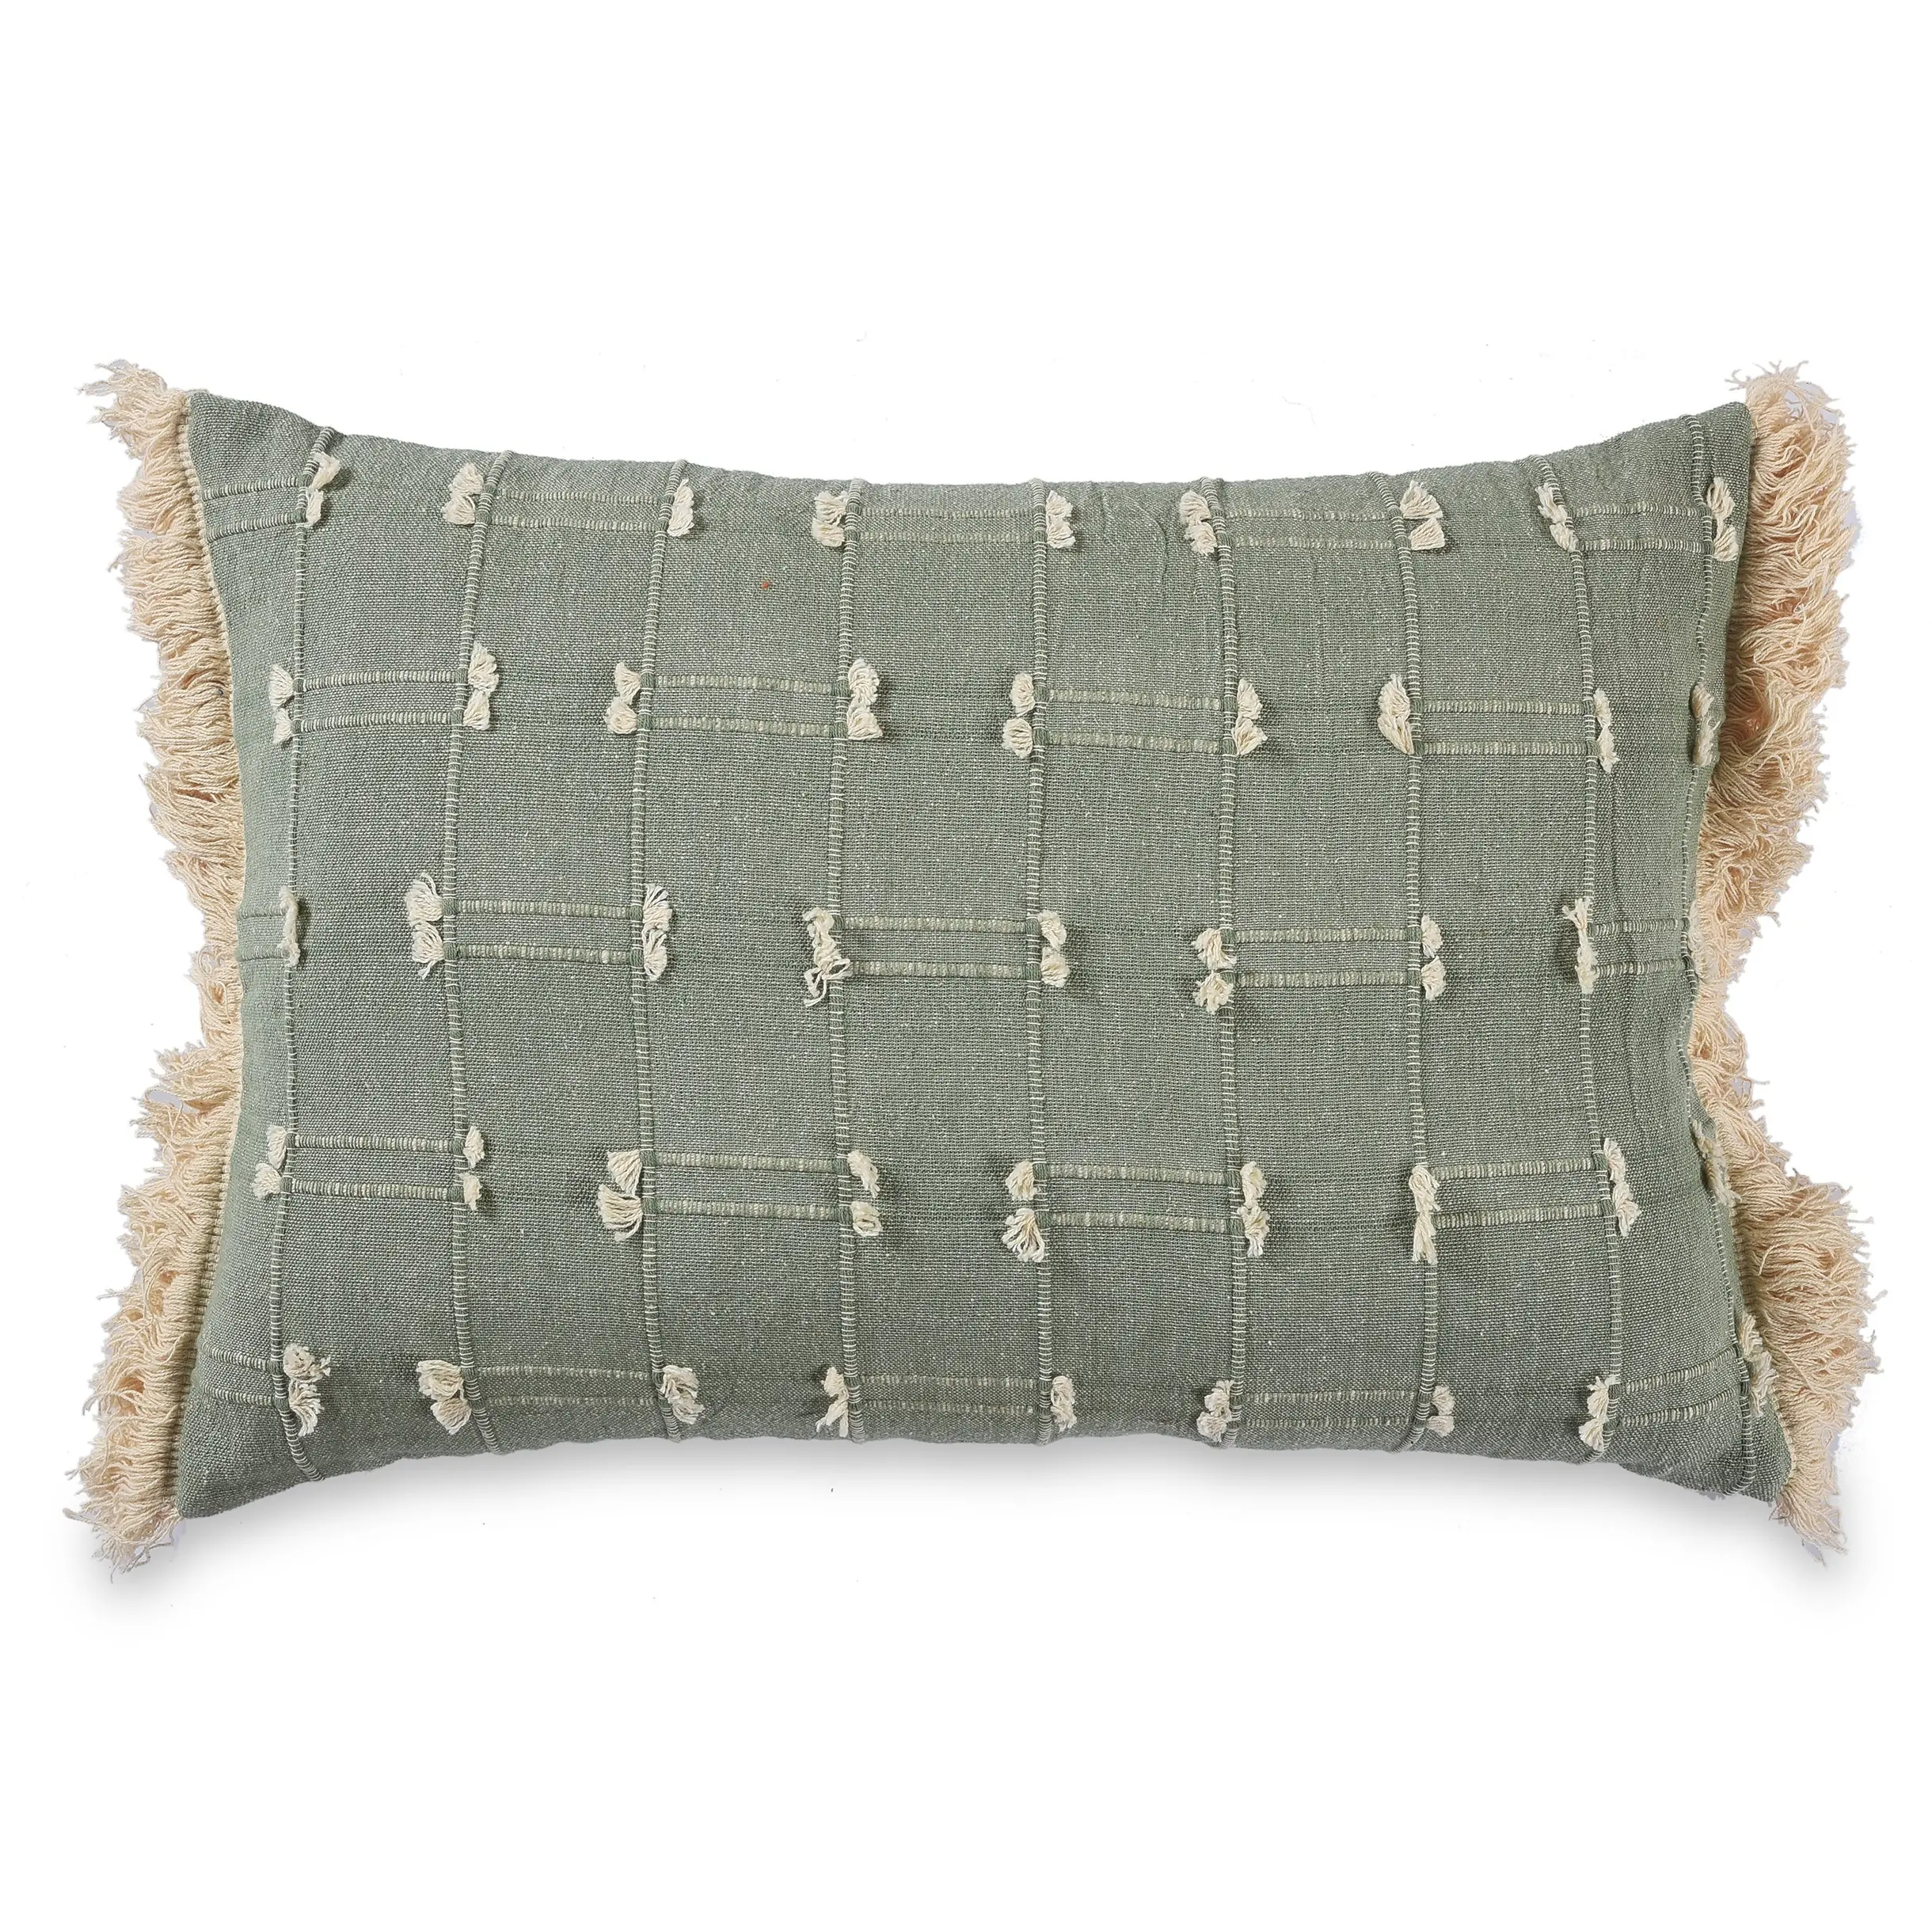 Boho cushion Cotton Striped Jacquard pillow case for Sofa Couch Living Room Cushion Green and White Pillow Cover